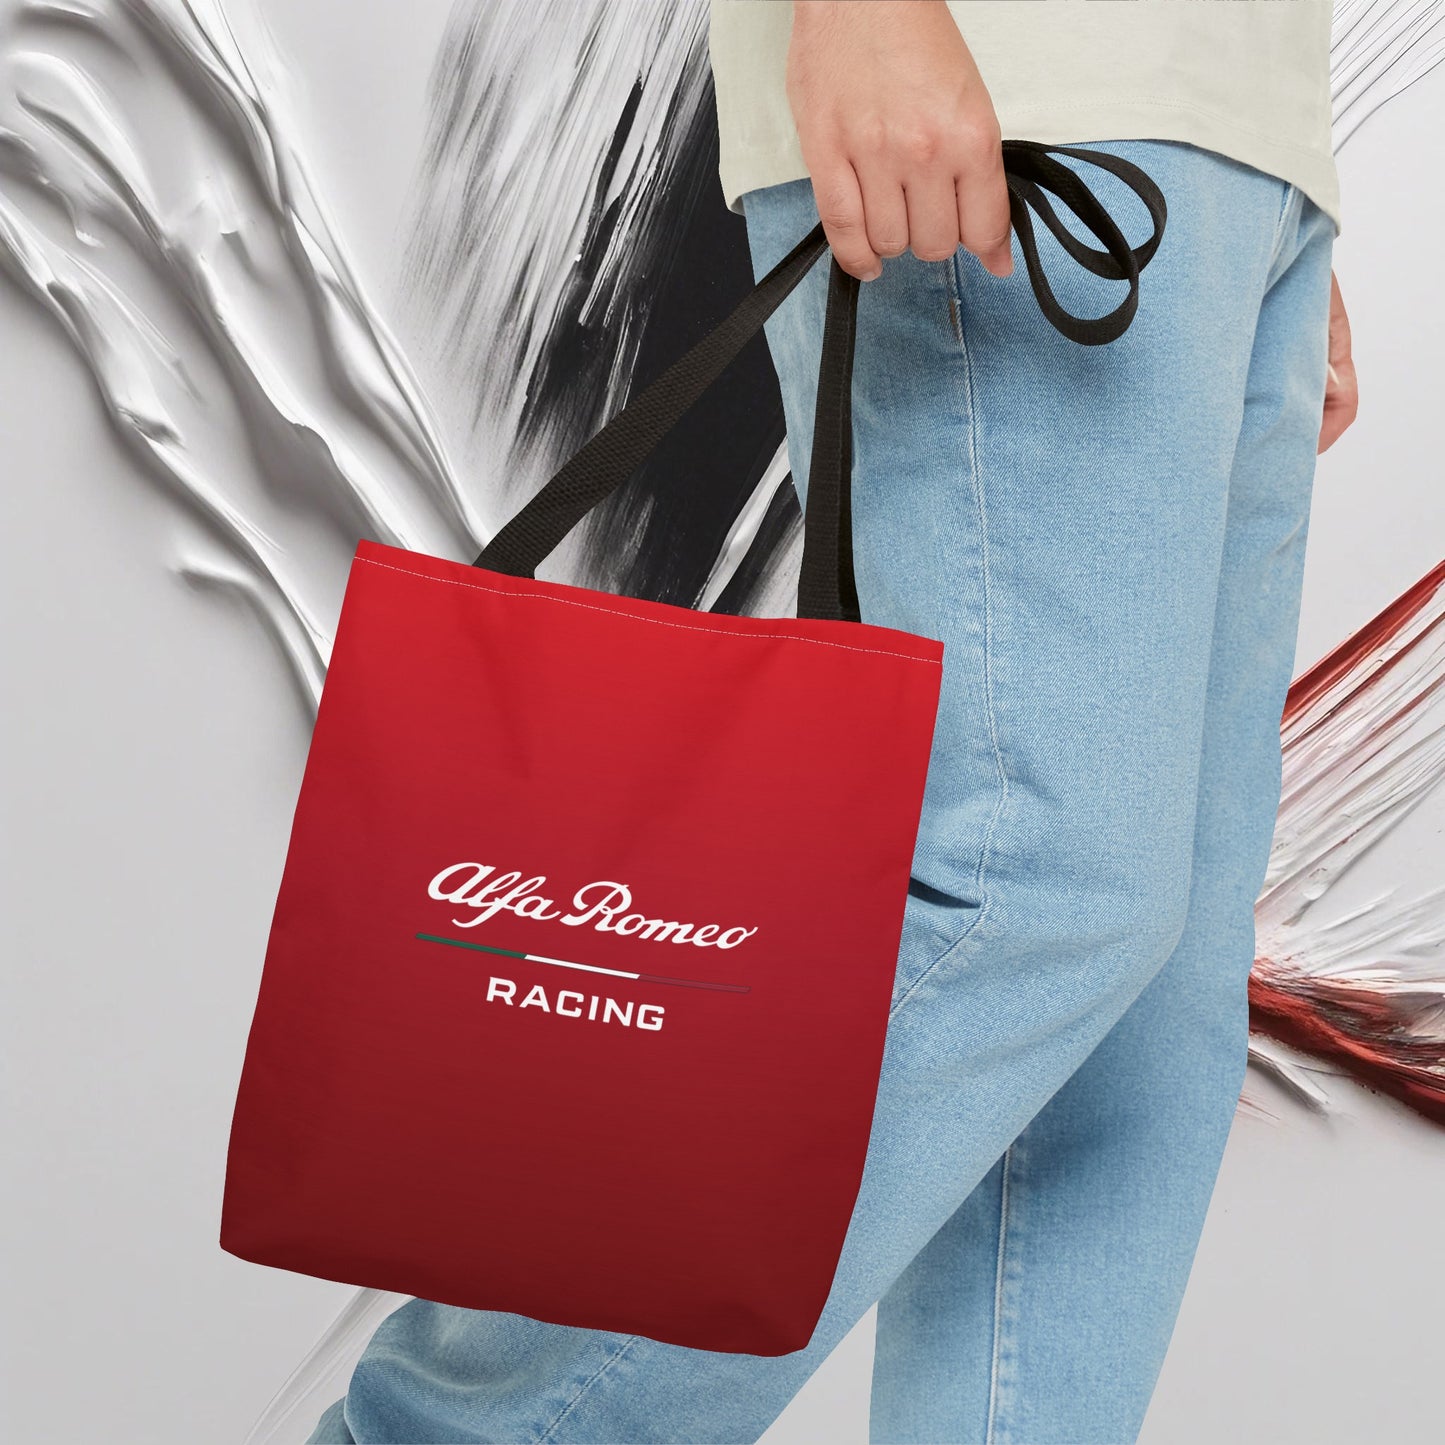 Alfa Romeo Racing Tote Bag - Rosso Etna, Durable Polyester, Multiple Sizes